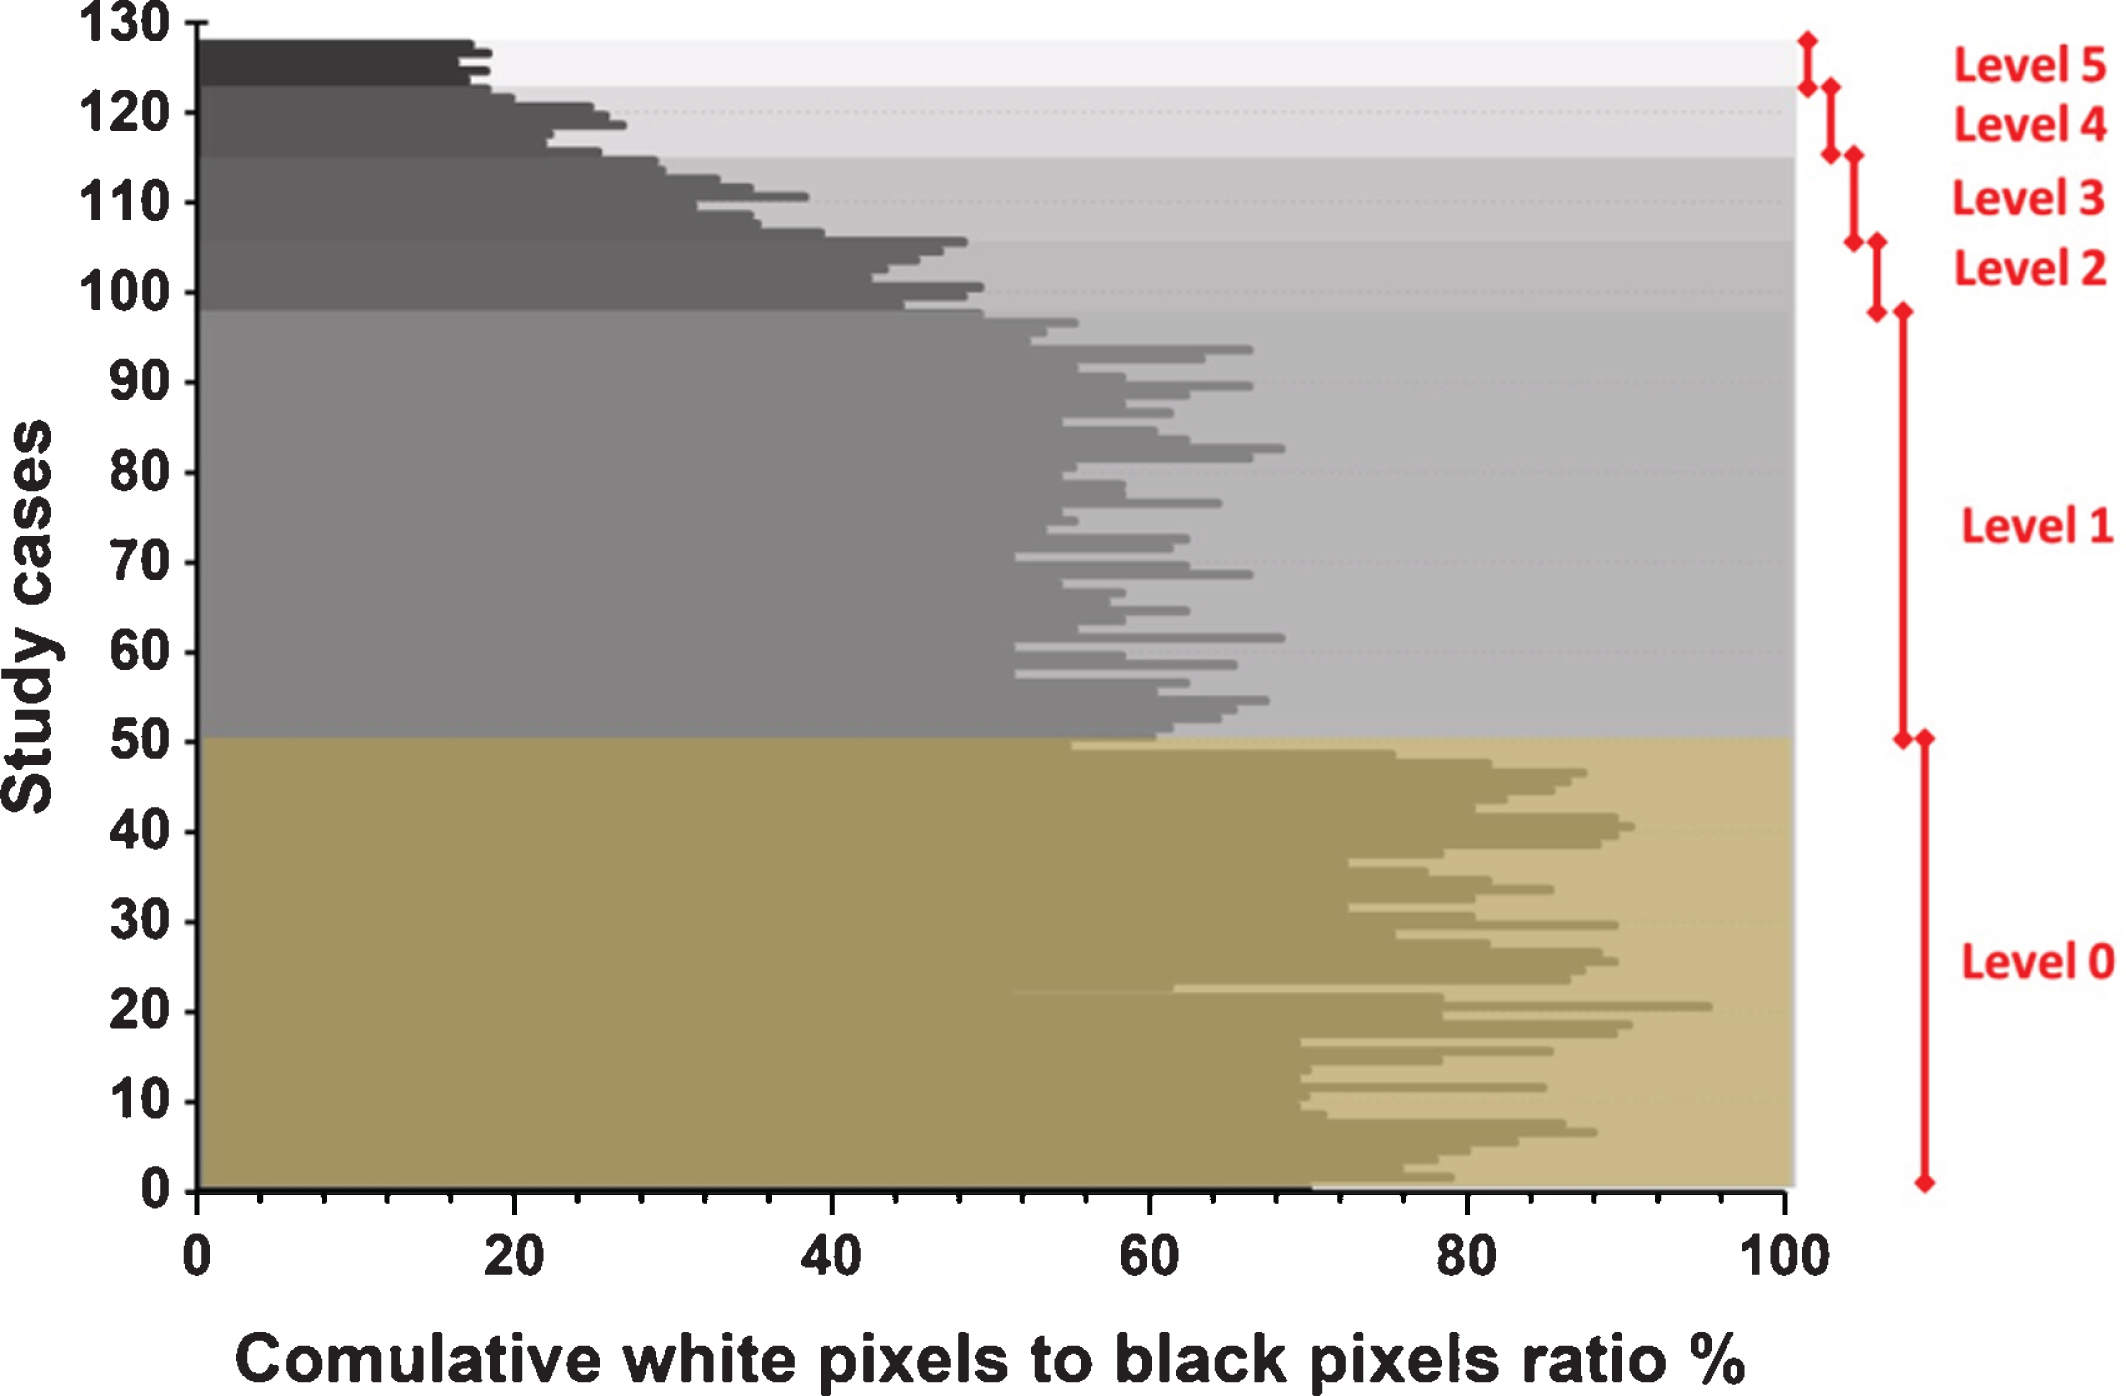 The six severity levels based on the cumulative ratio of white pixels to black pixels for all study cases.